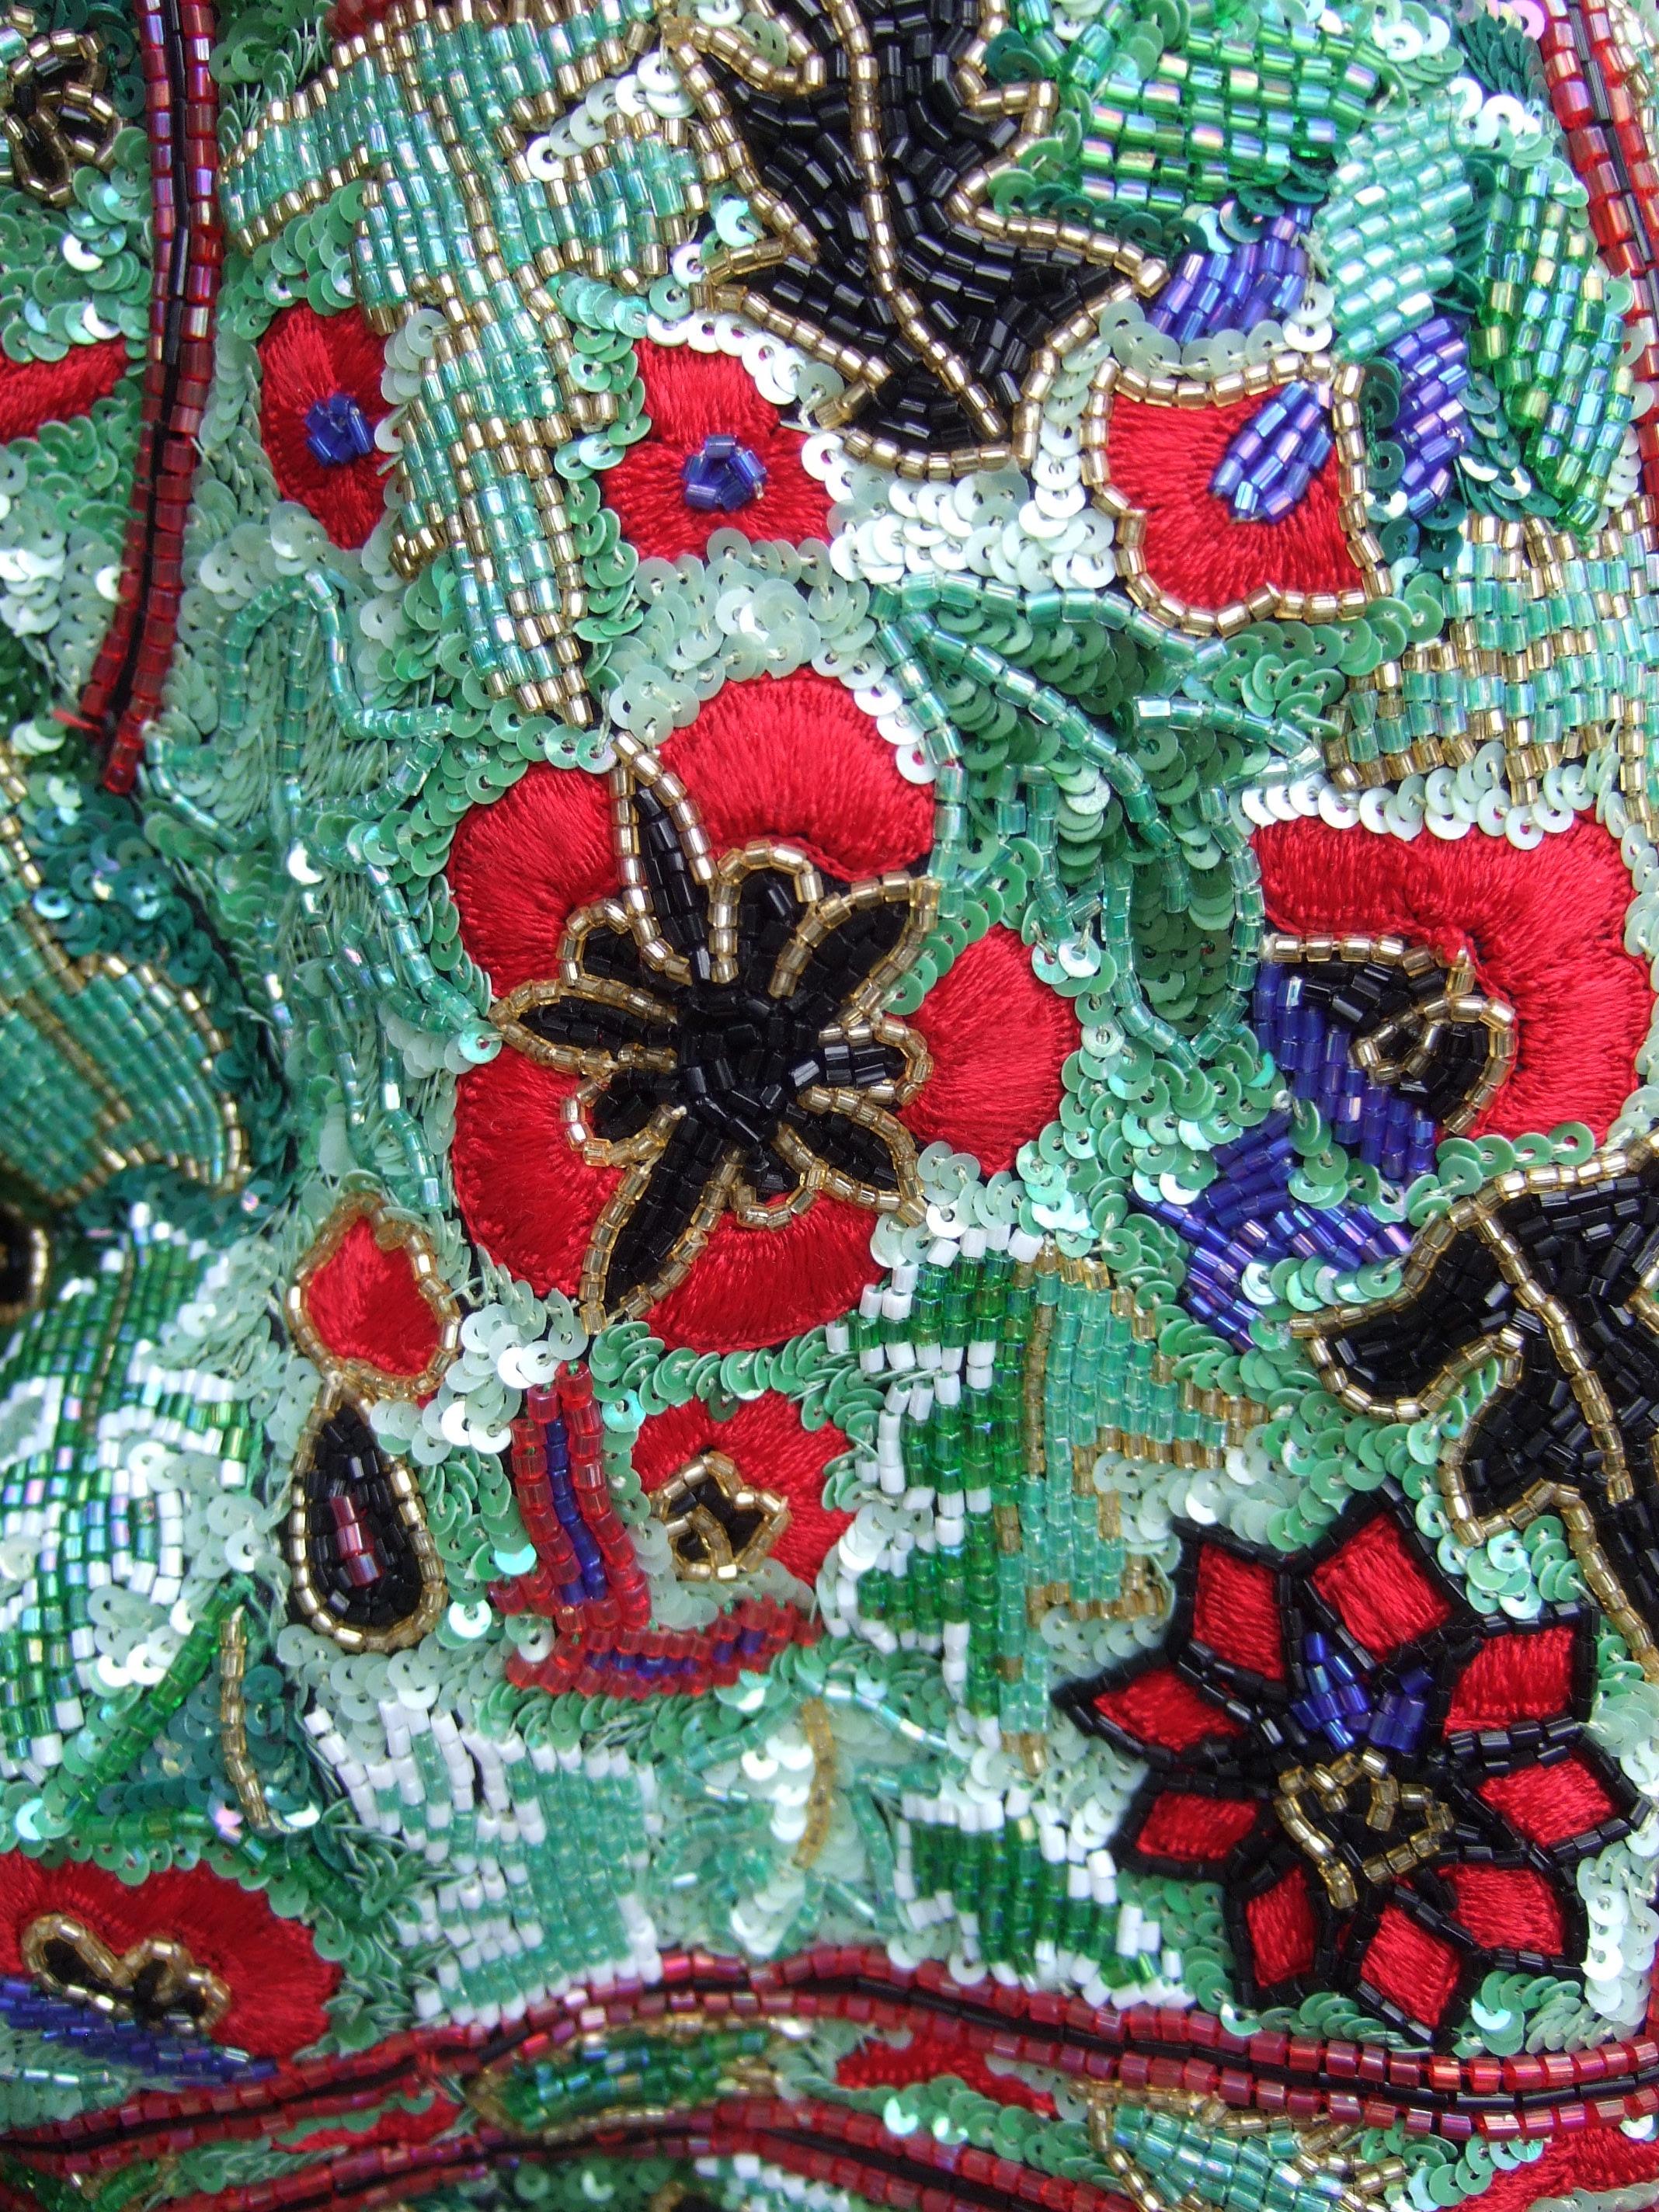 Exquisite Elaborate Glass Floral Beaded Embroidered Bolero Jacket c 1980s For Sale 3